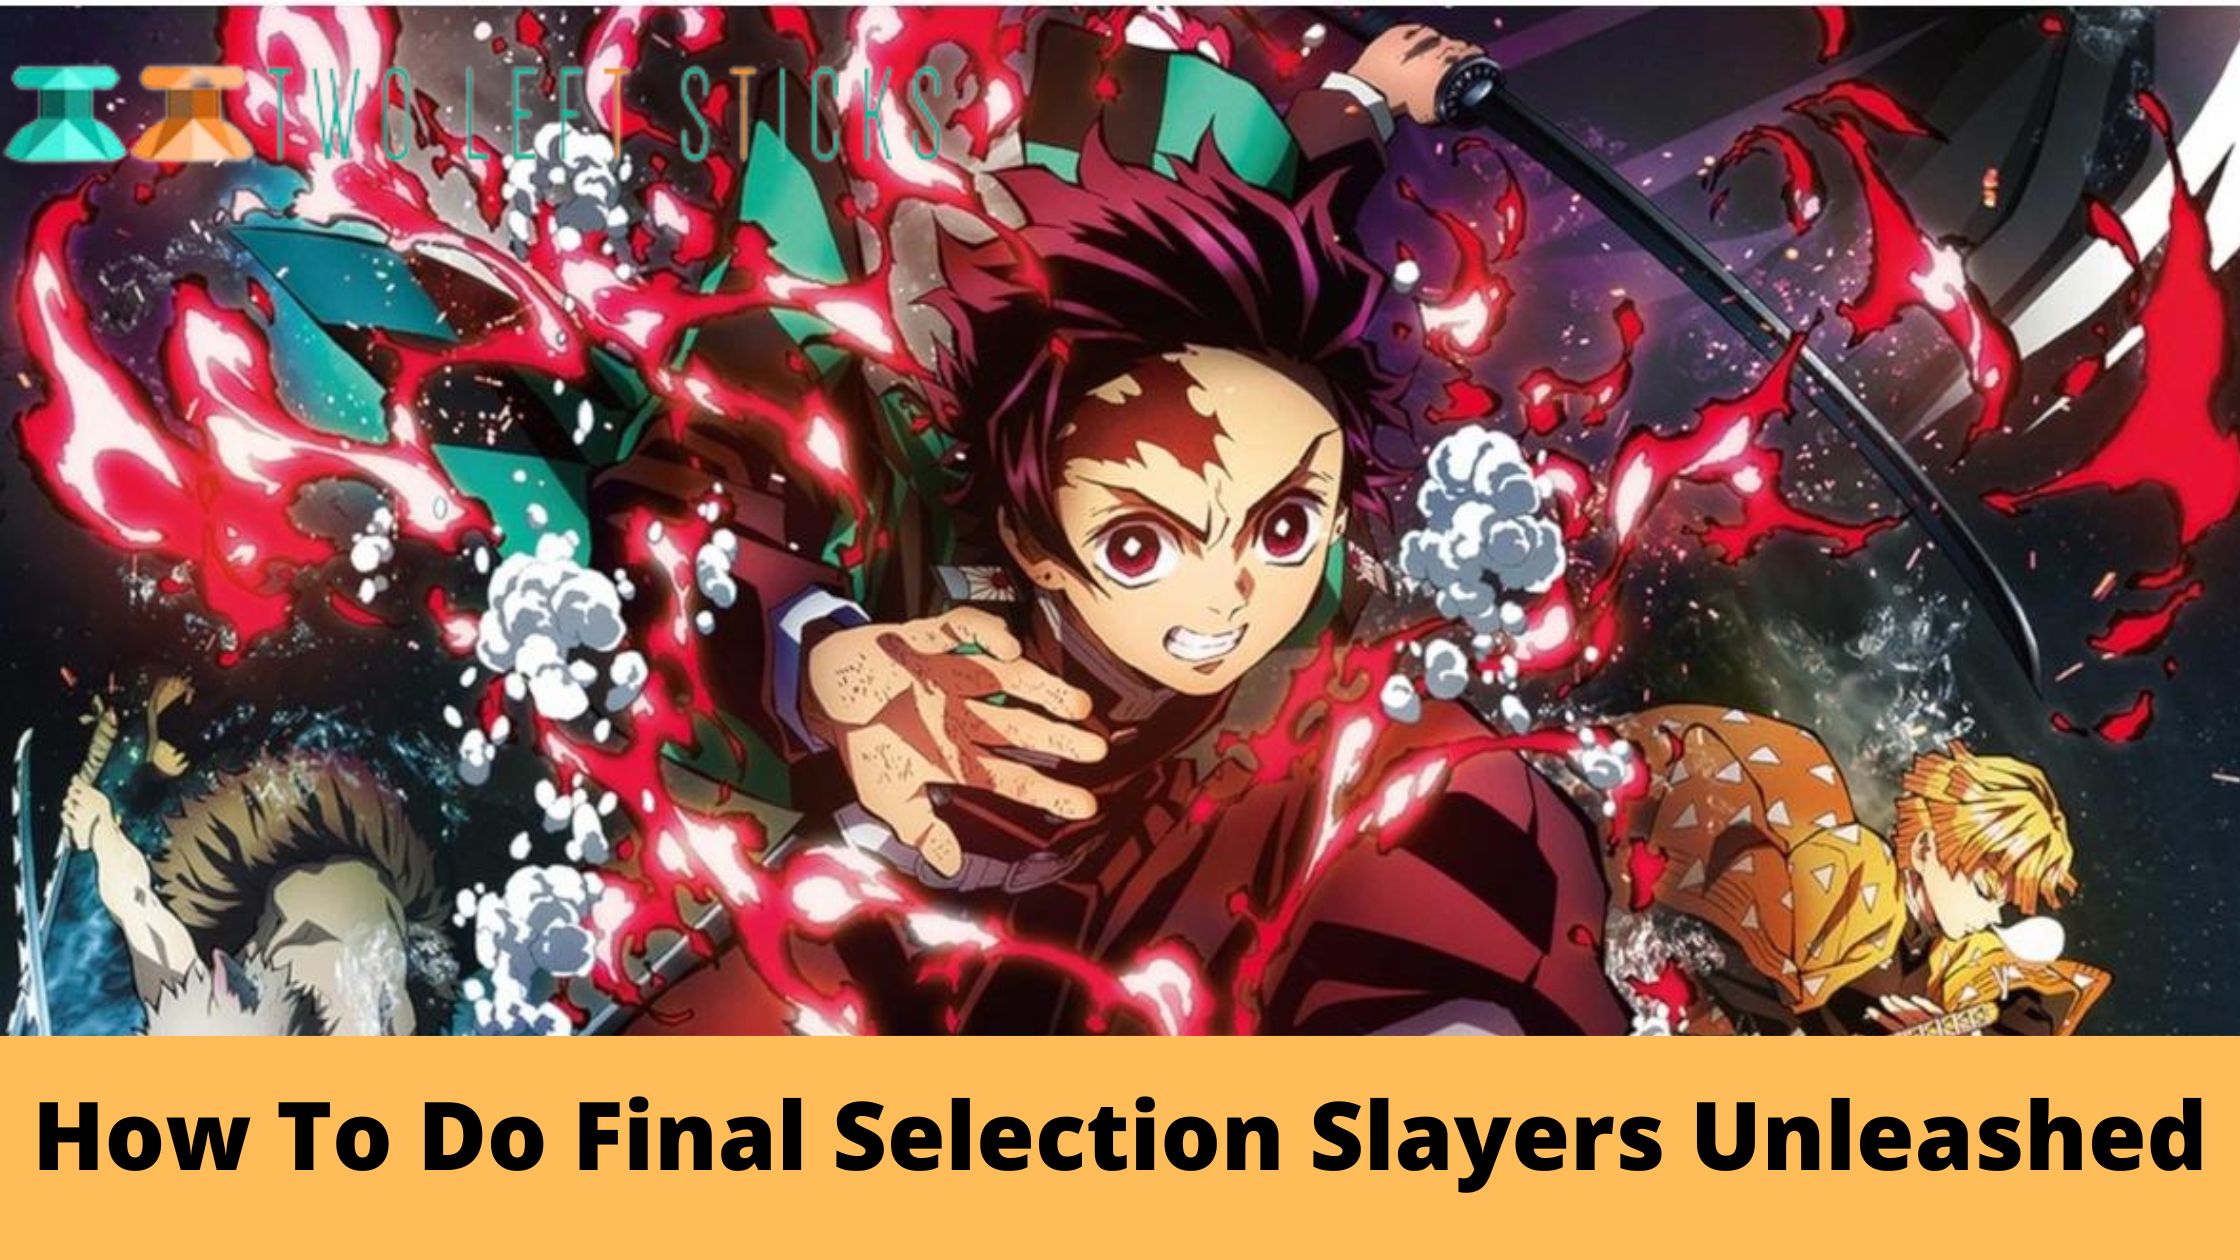 How To Do Final Selection Slayers Unleashed